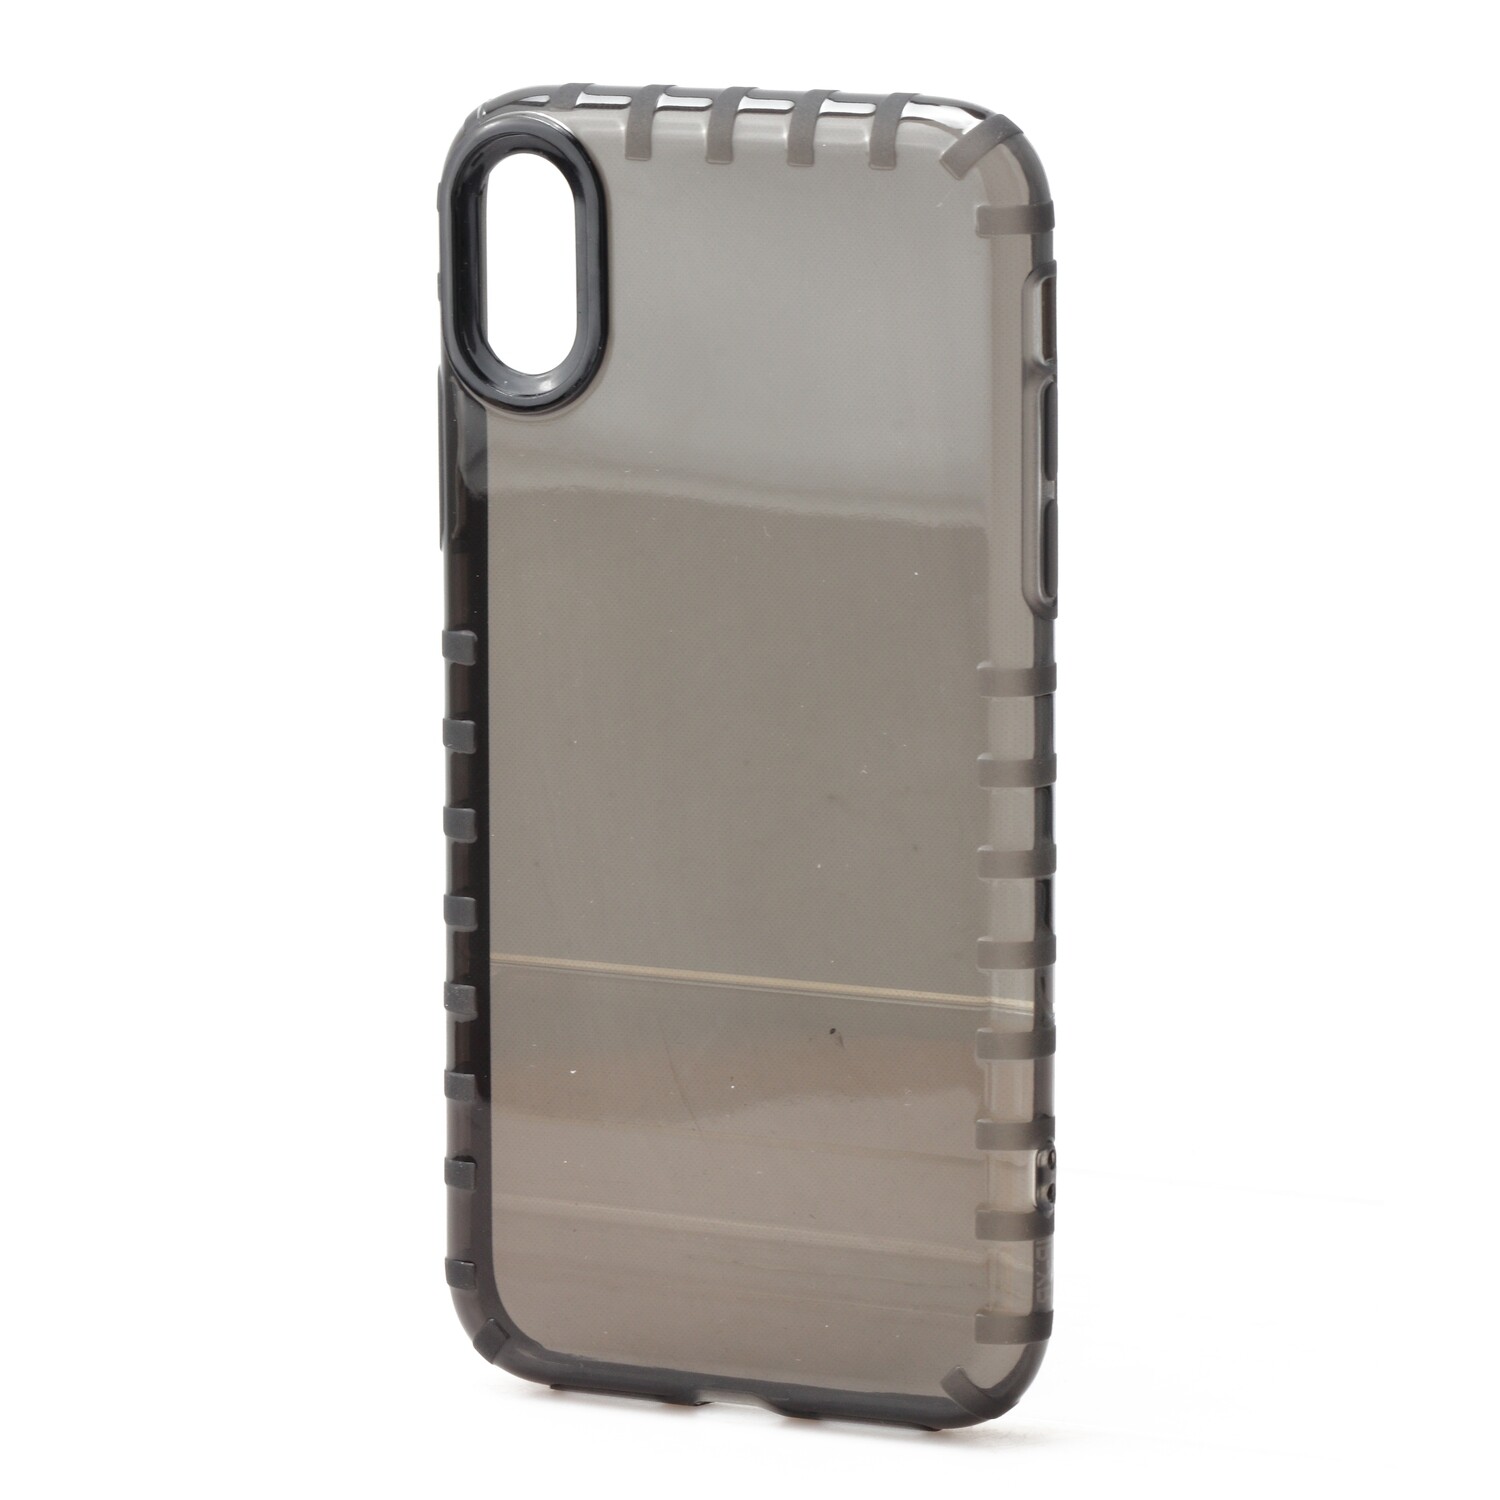 iPhone X / Xs 5.8 Clear Slip Proof Jelly Case, Color: Gray